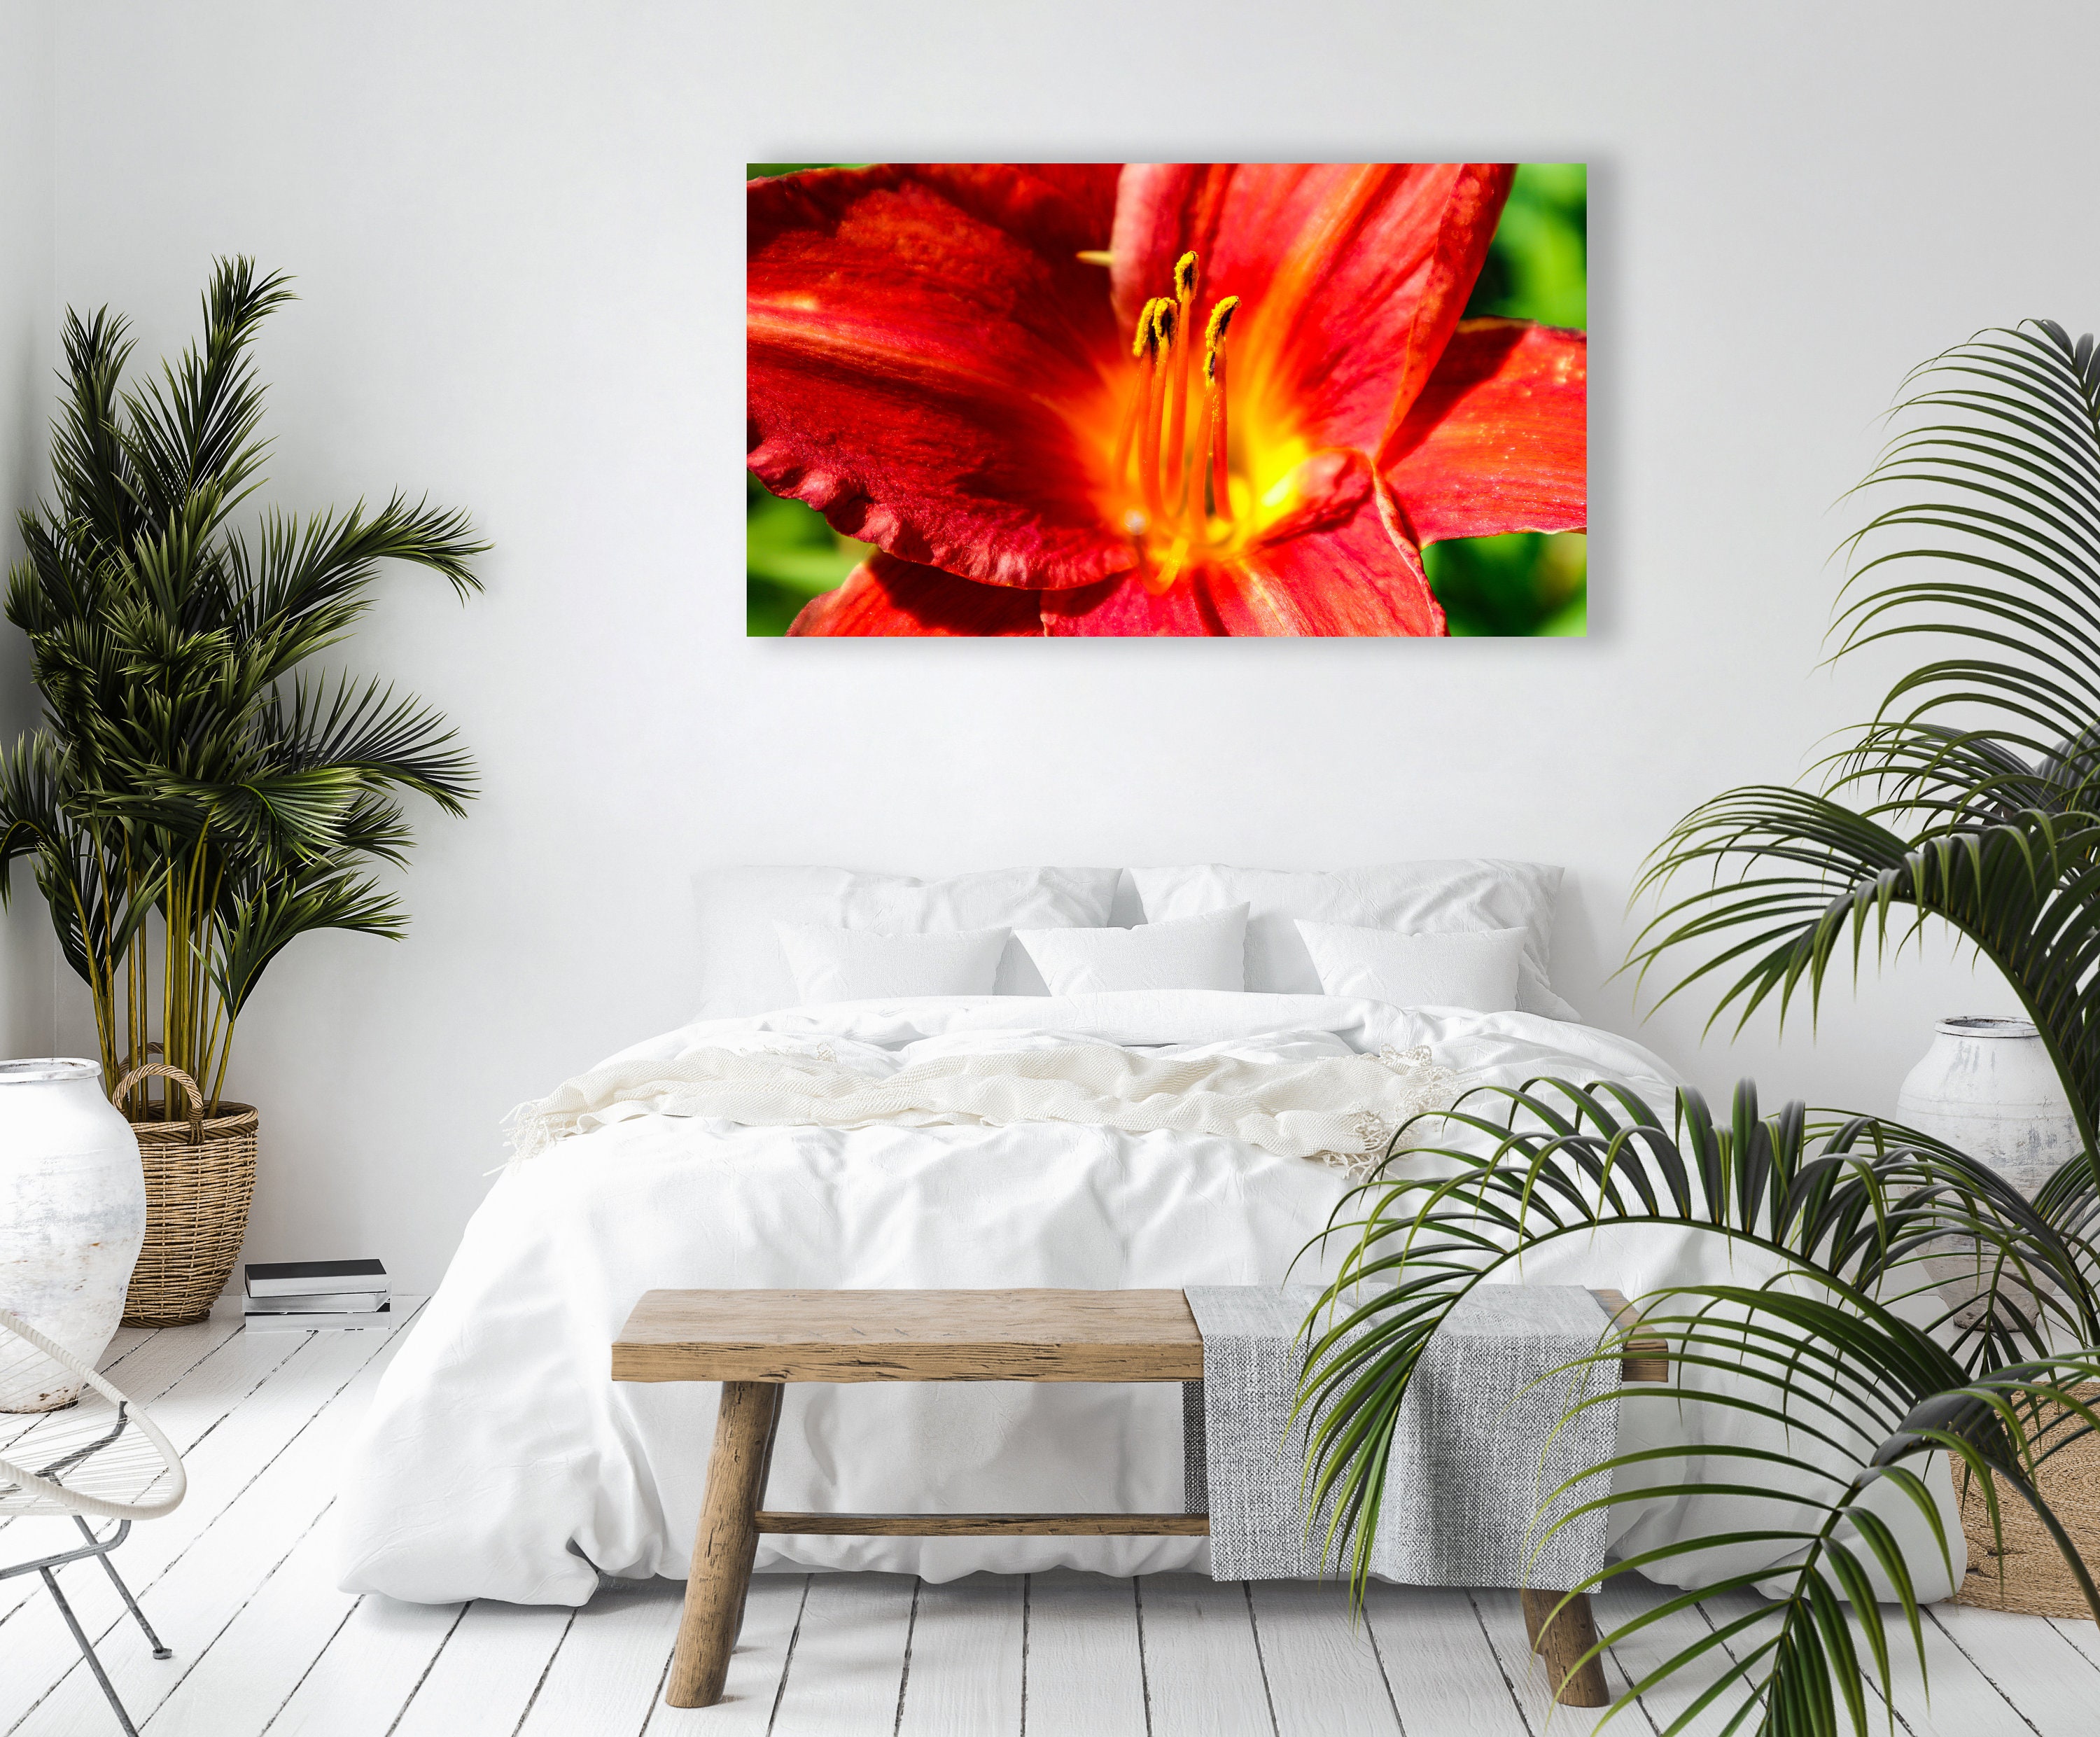 Hera's Gift Day Lily Floral Photo Image Available in Print, Canvas ...